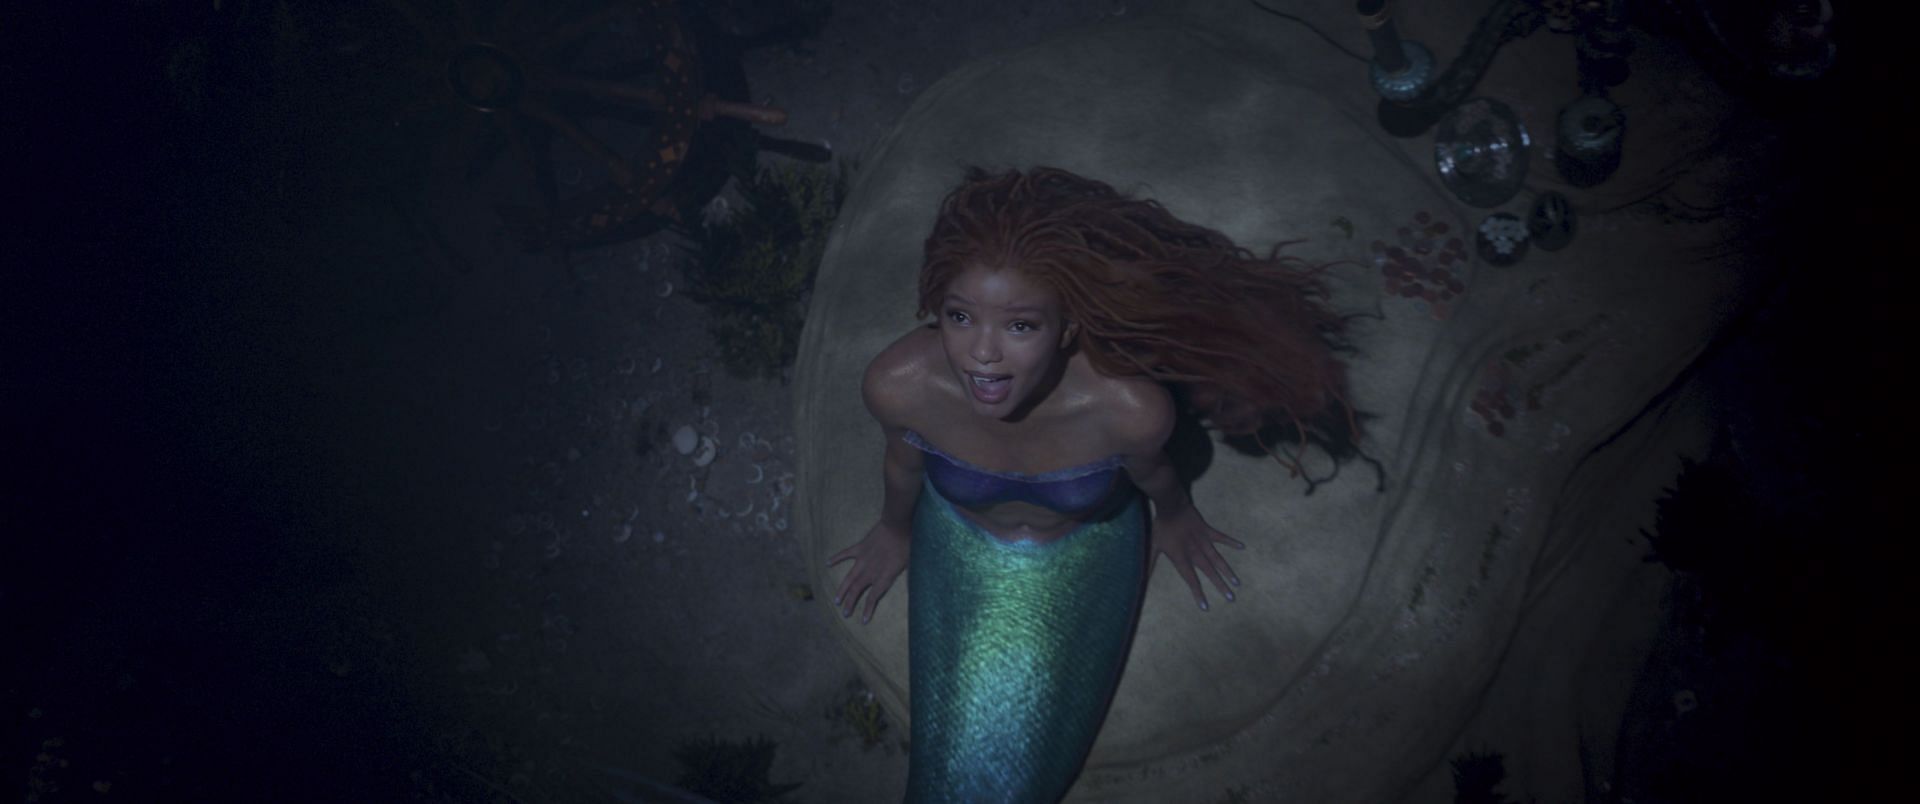 Disney&#039;s The Little Mermaid sets a new record with an epic runtime of over 2 hours (Image via Disney)